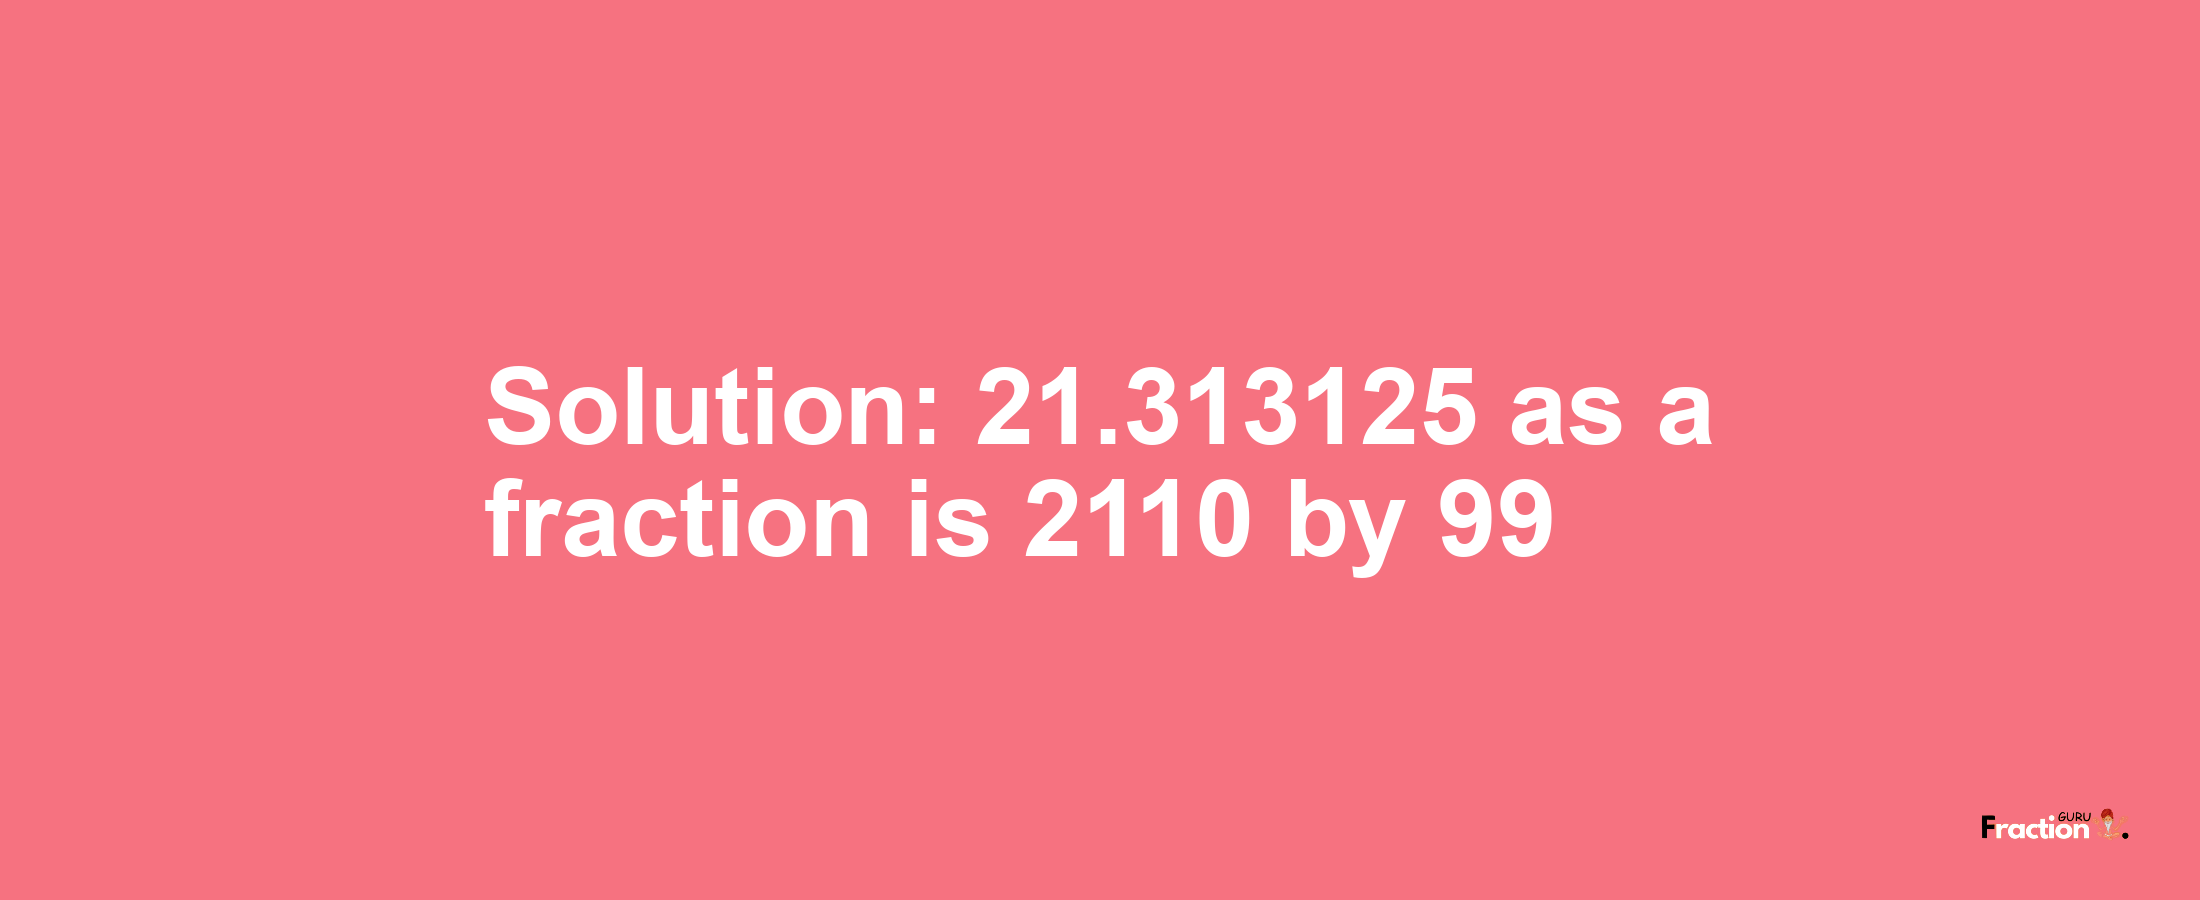 Solution:21.313125 as a fraction is 2110/99